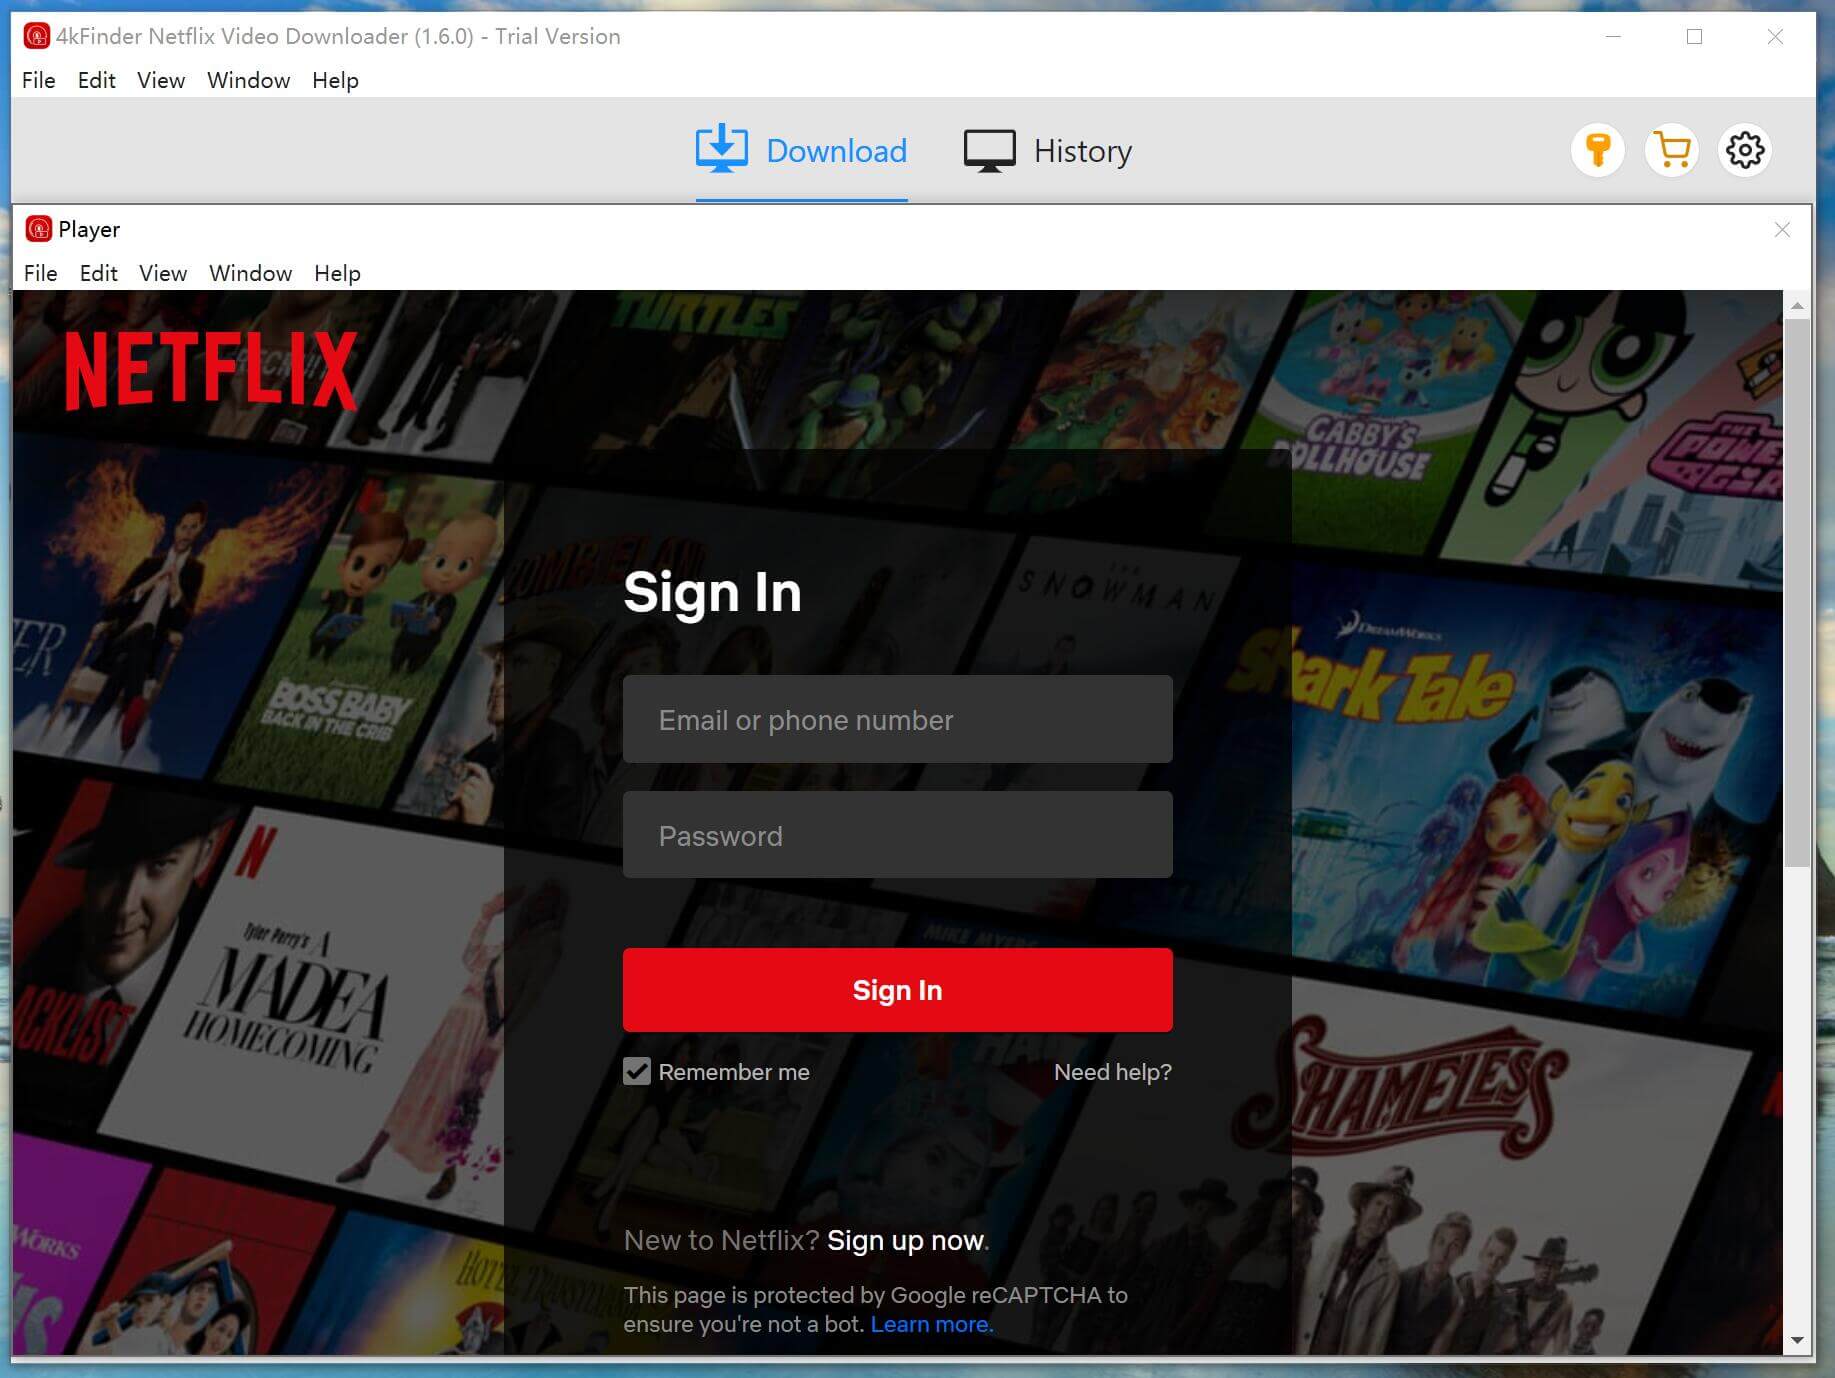 sign in to Netflix account